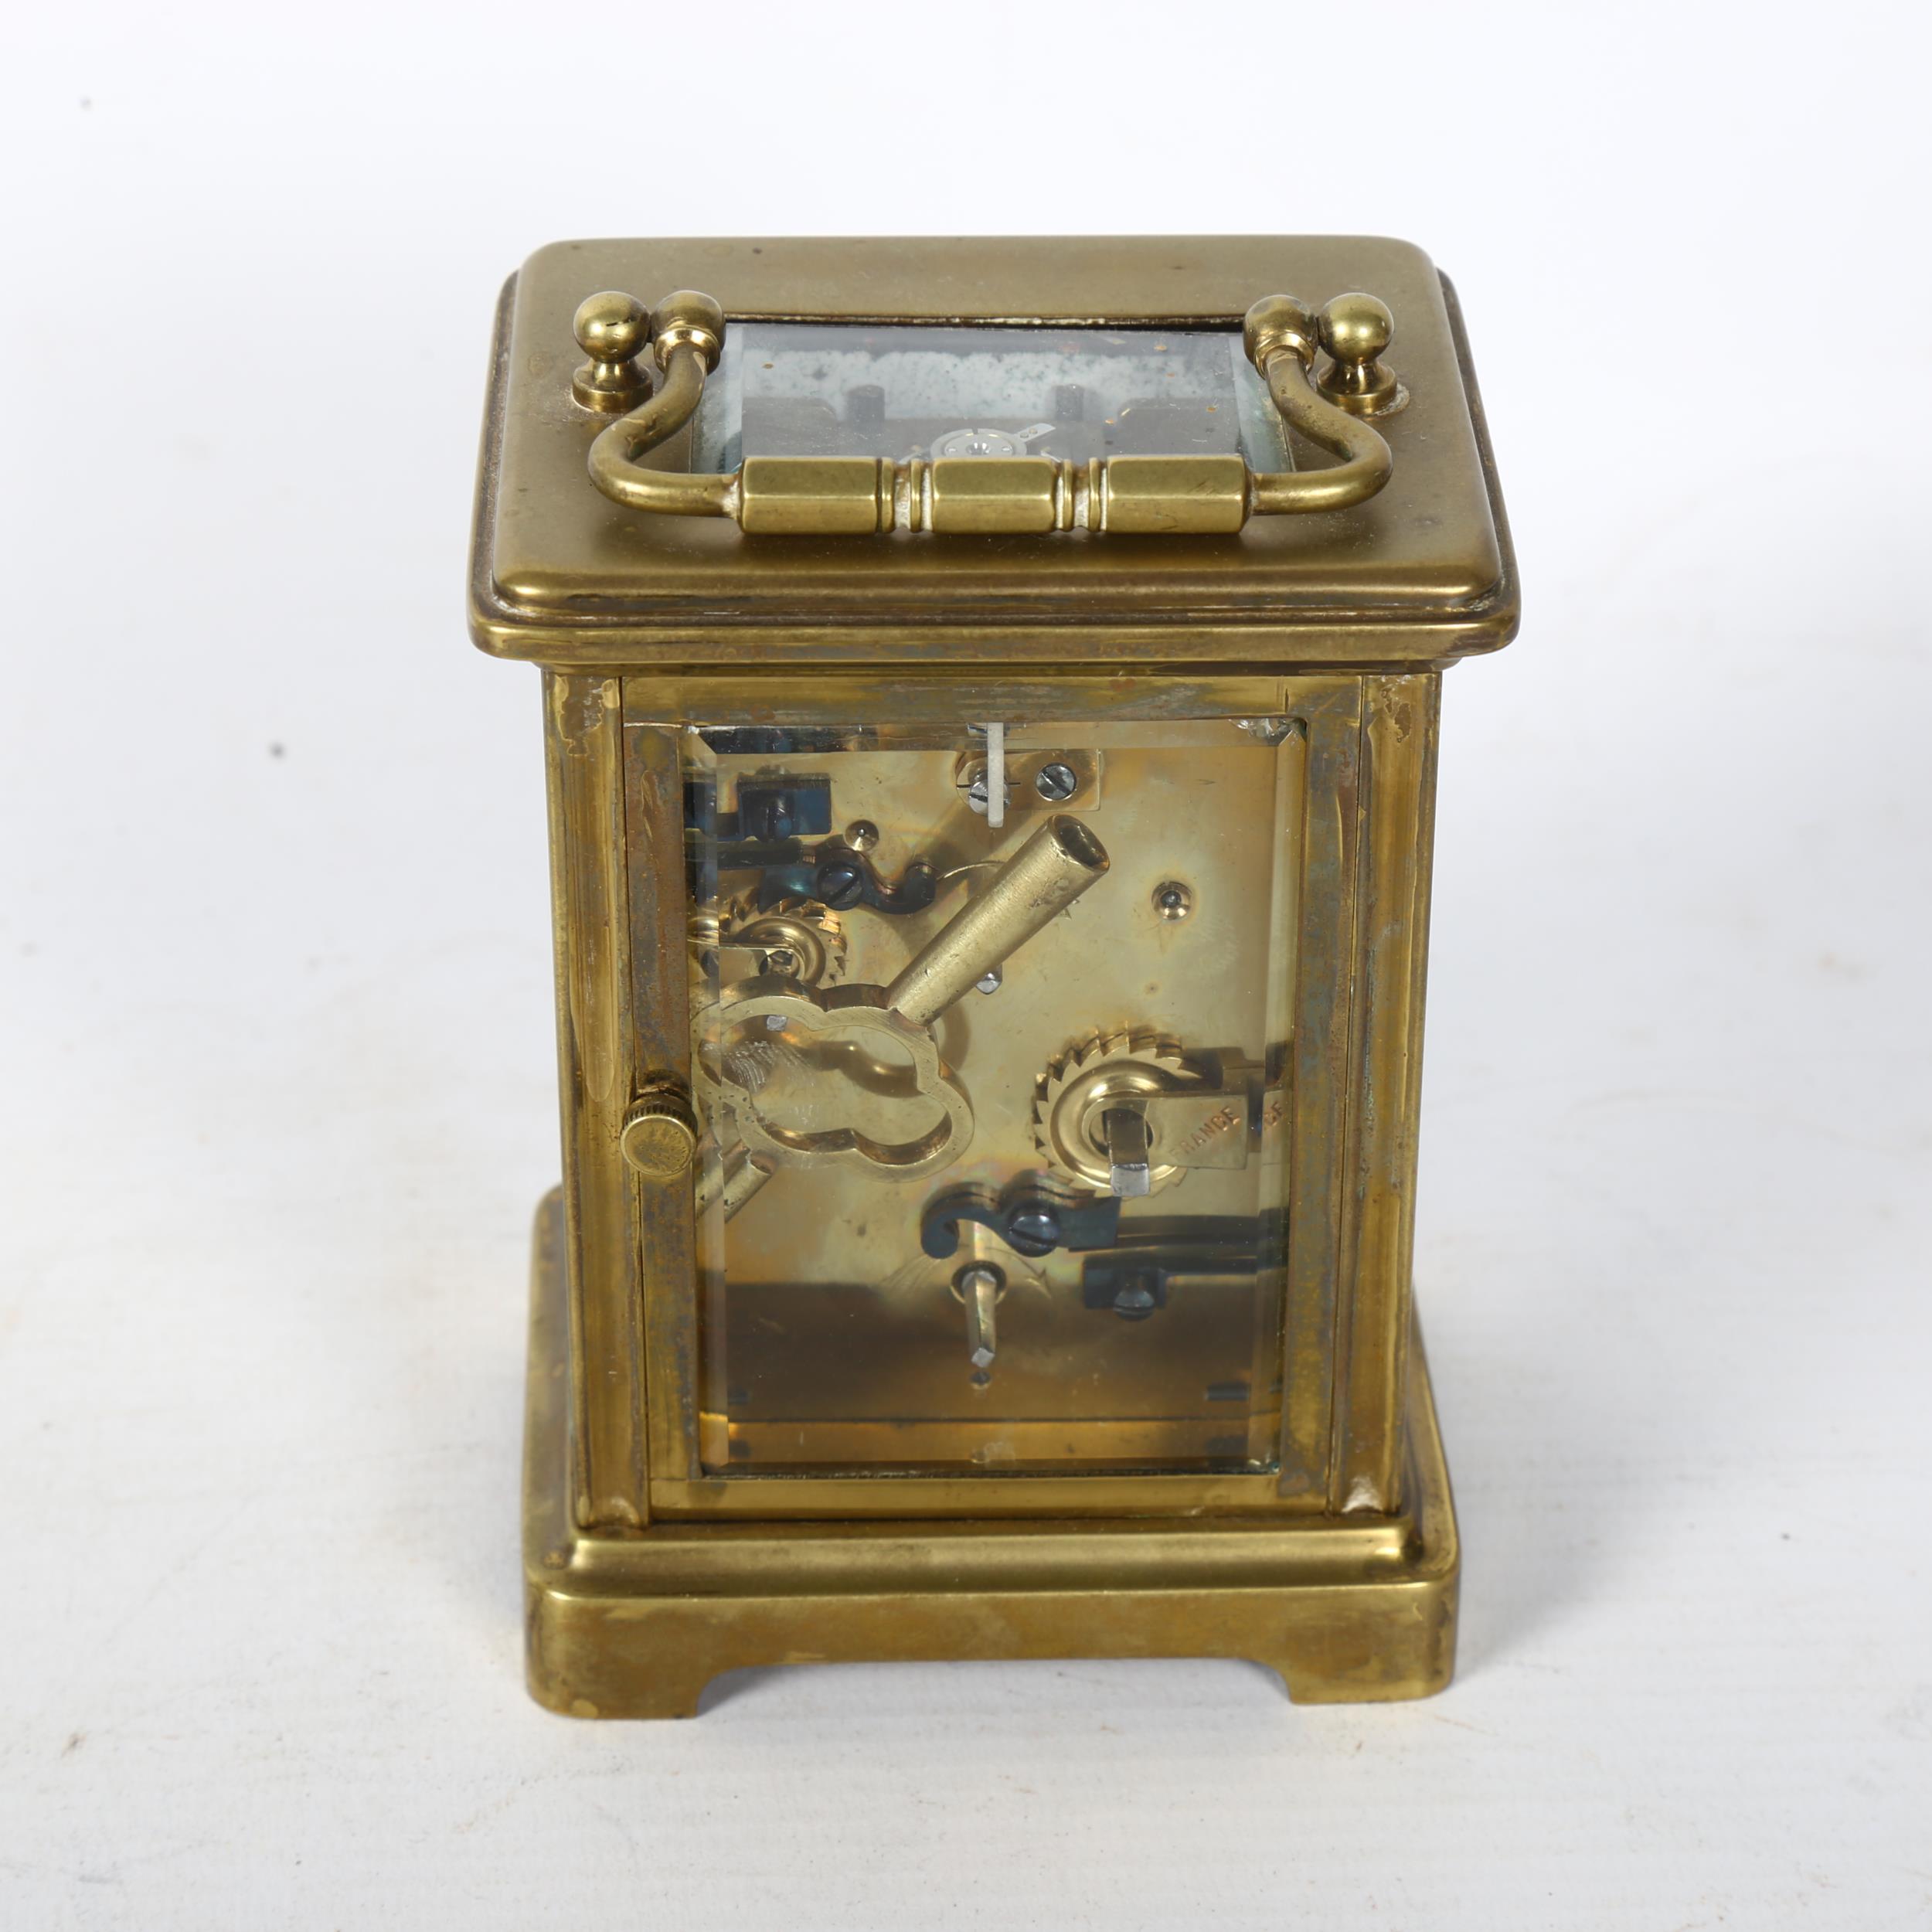 J C VICKERY - a brass-cased carriage clock with enamel dial, Romany numerals and alarm dial, - Image 2 of 2